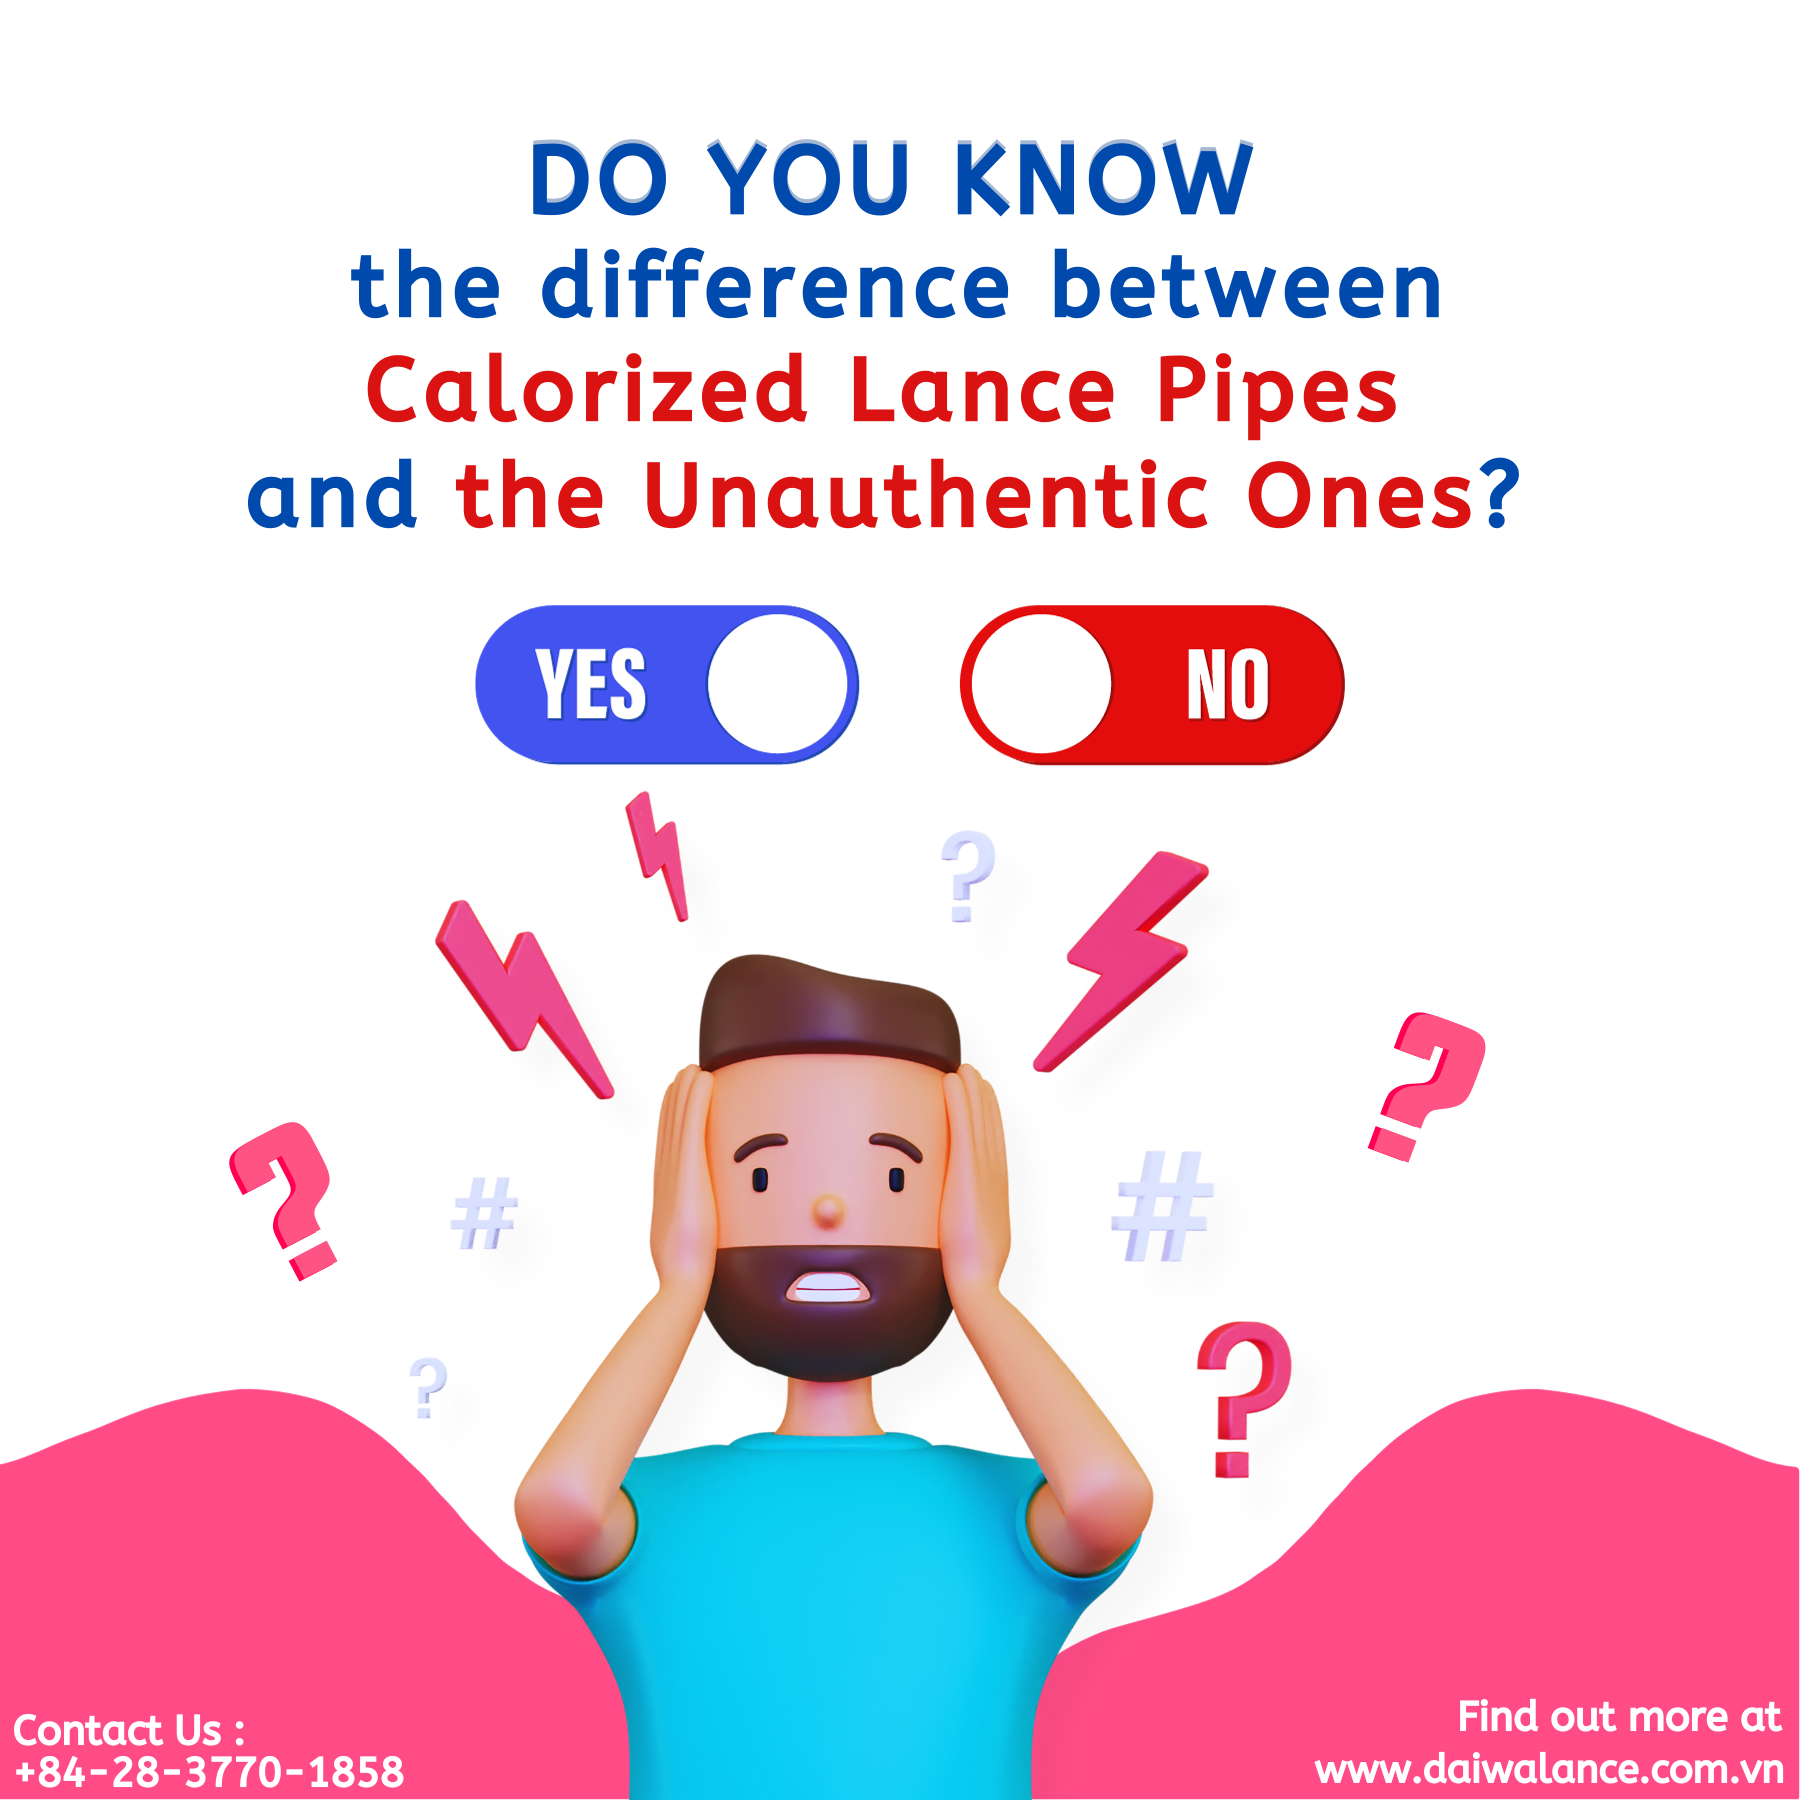 How to Recognize an Authentic Calorized Lance Pipe?